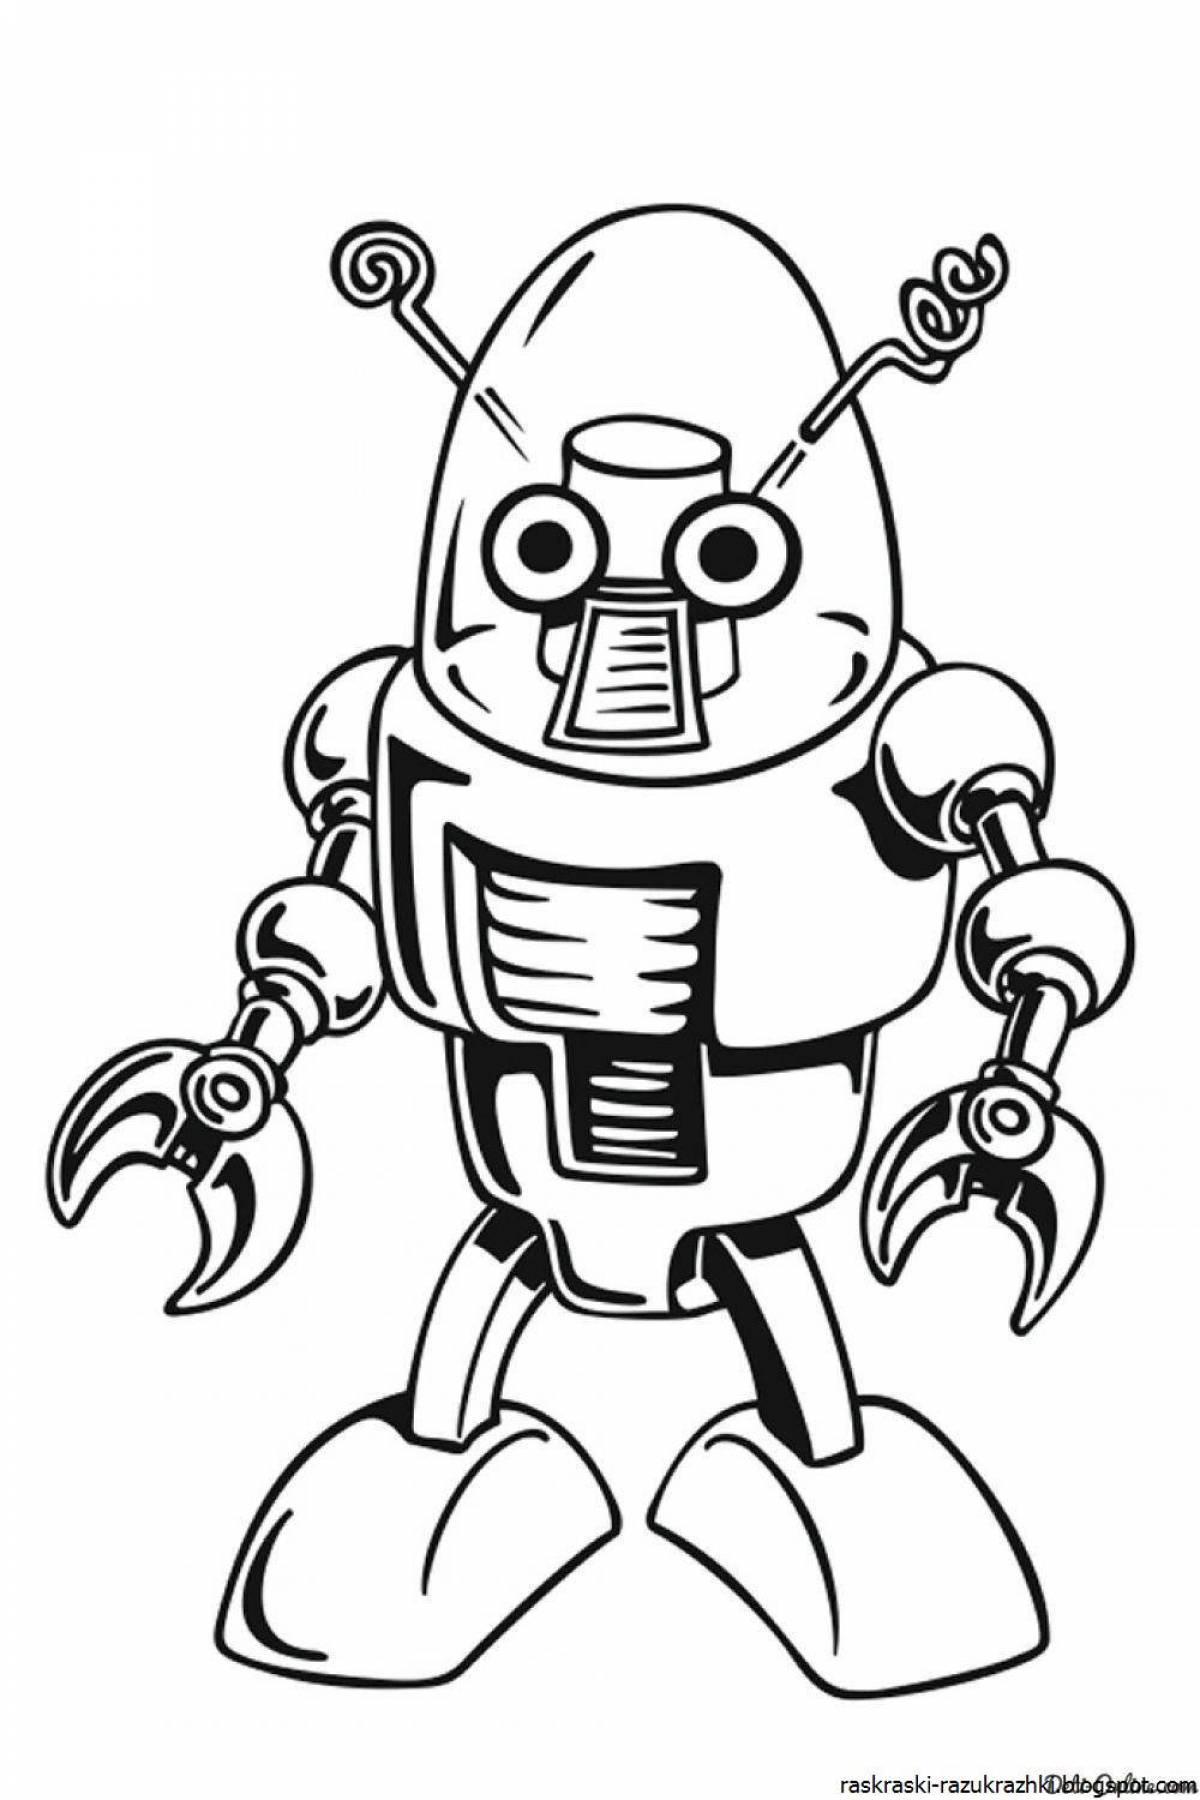 Colorful robot coloring book for boys